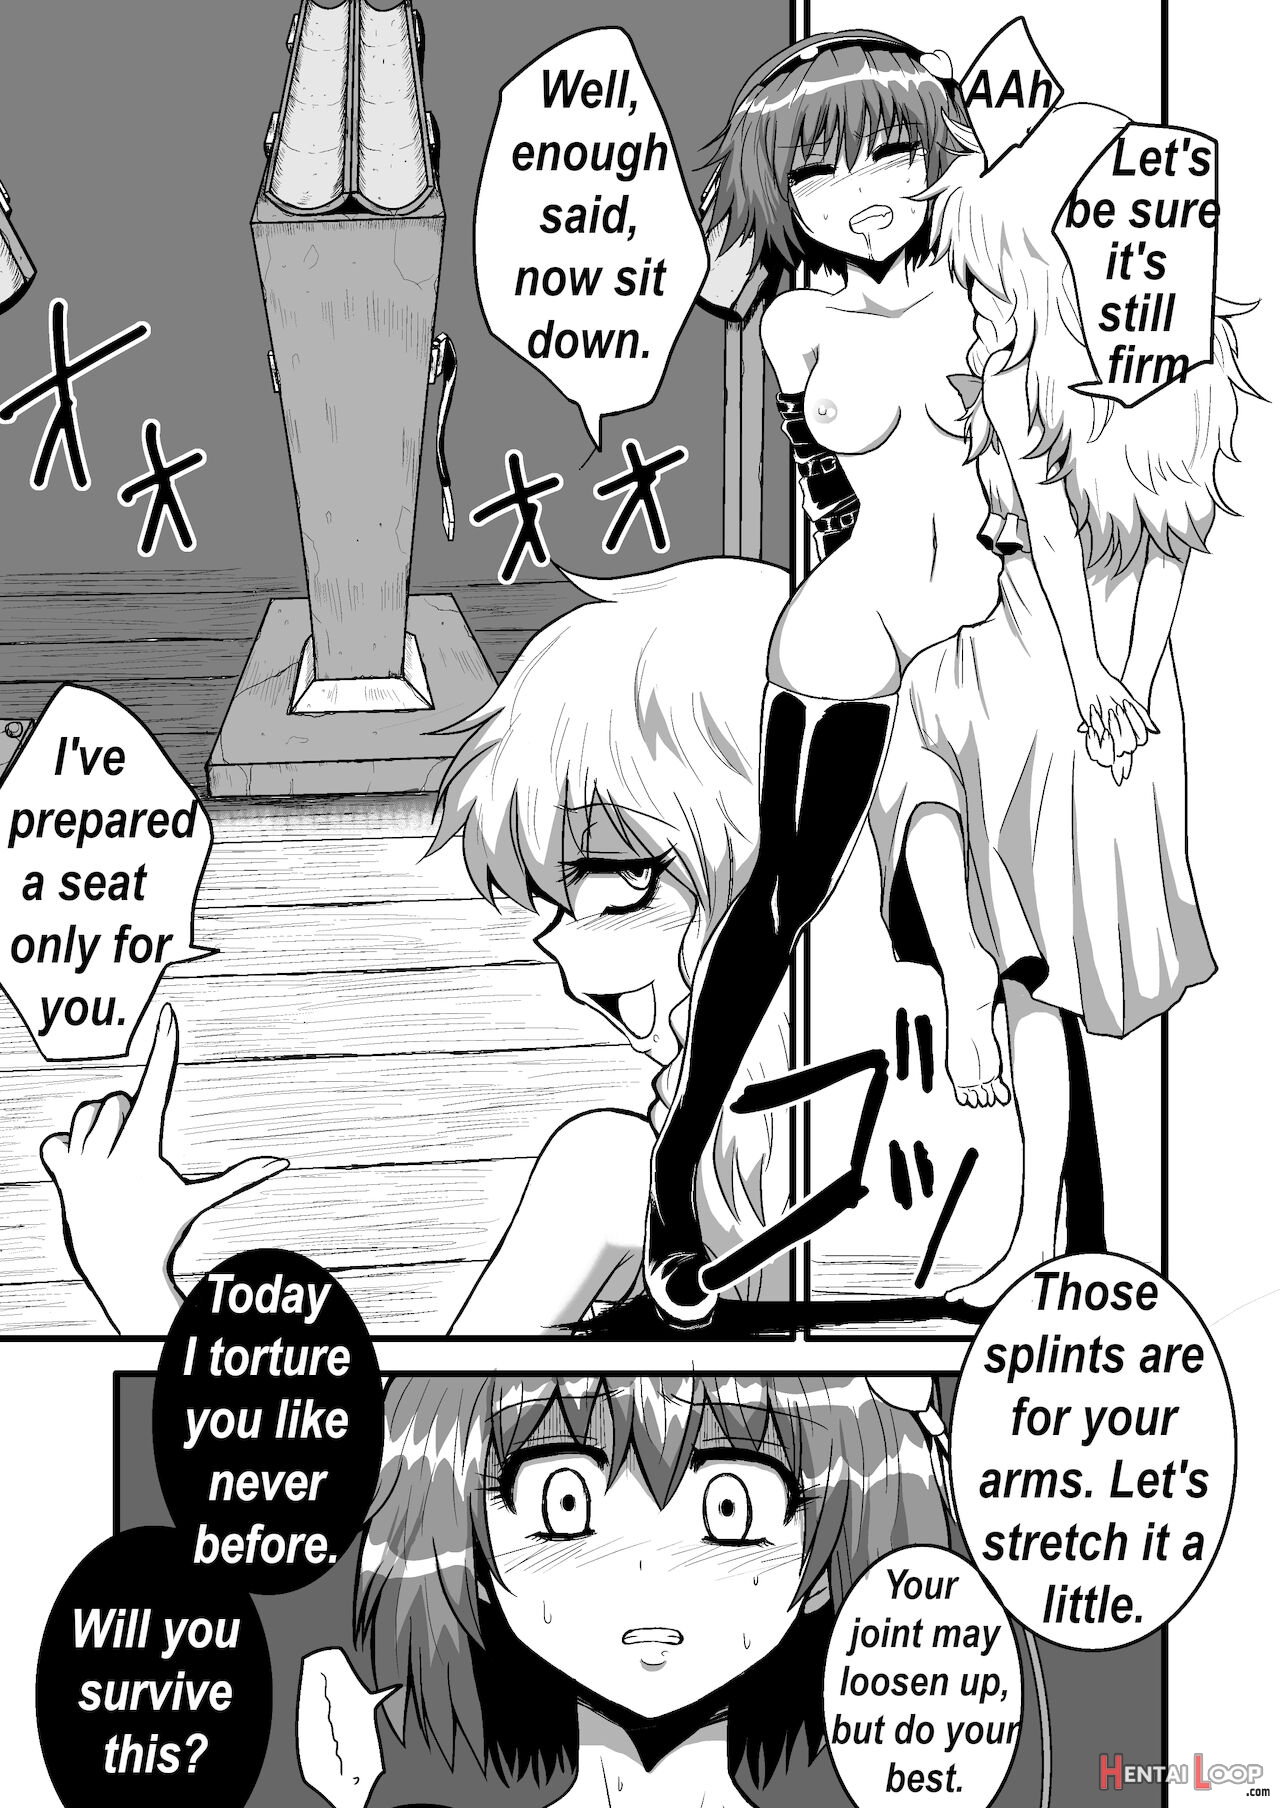 Marisa's Thrill - Take Care Of Yourself - 通り魔理沙にきをつけろ - Part 3 page 5